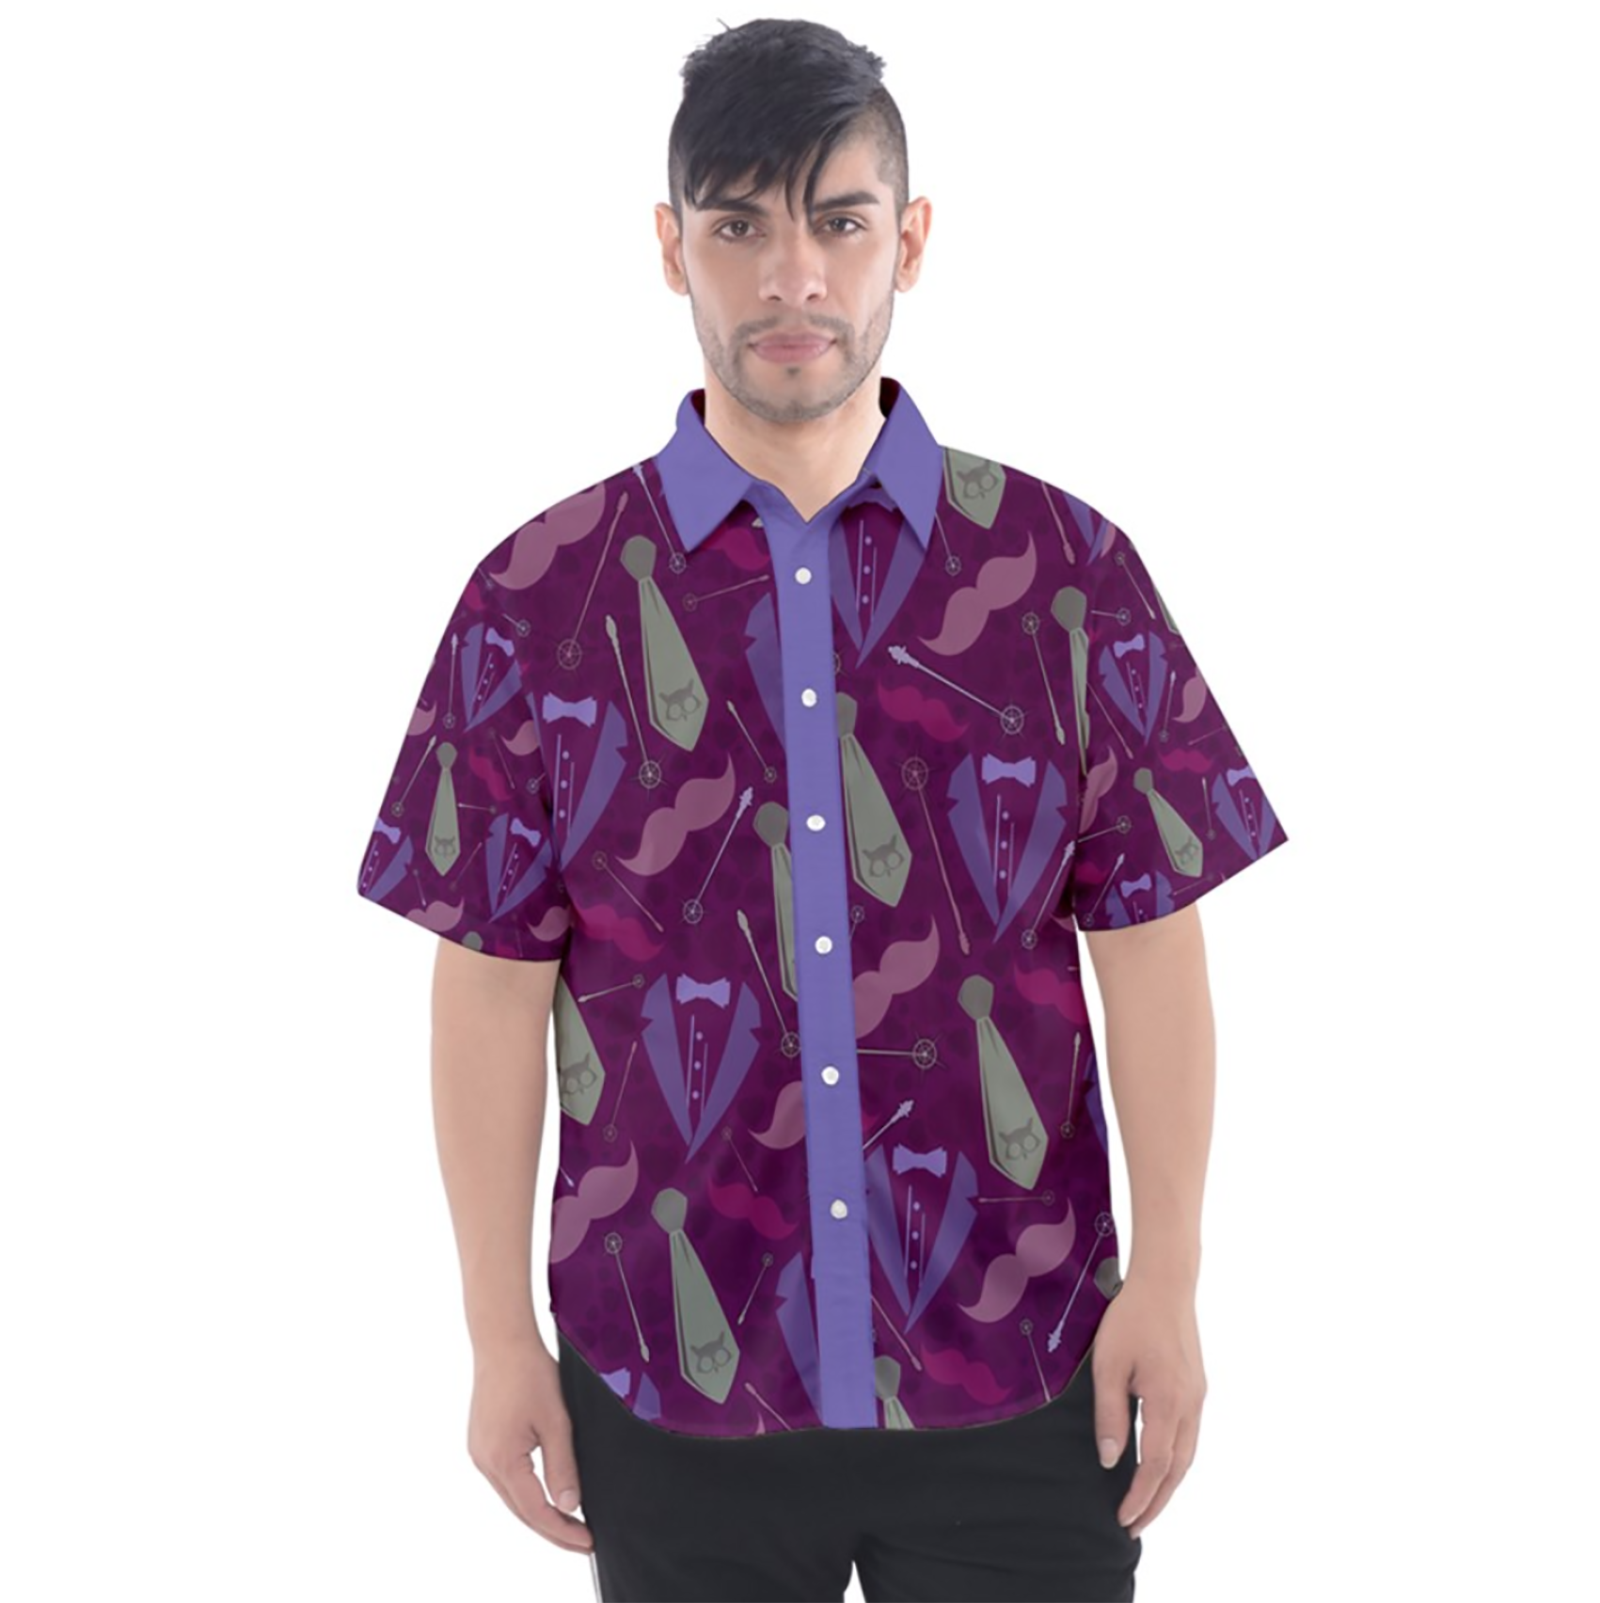 Charming Button Up Short Sleeve Shirt (Patterned)